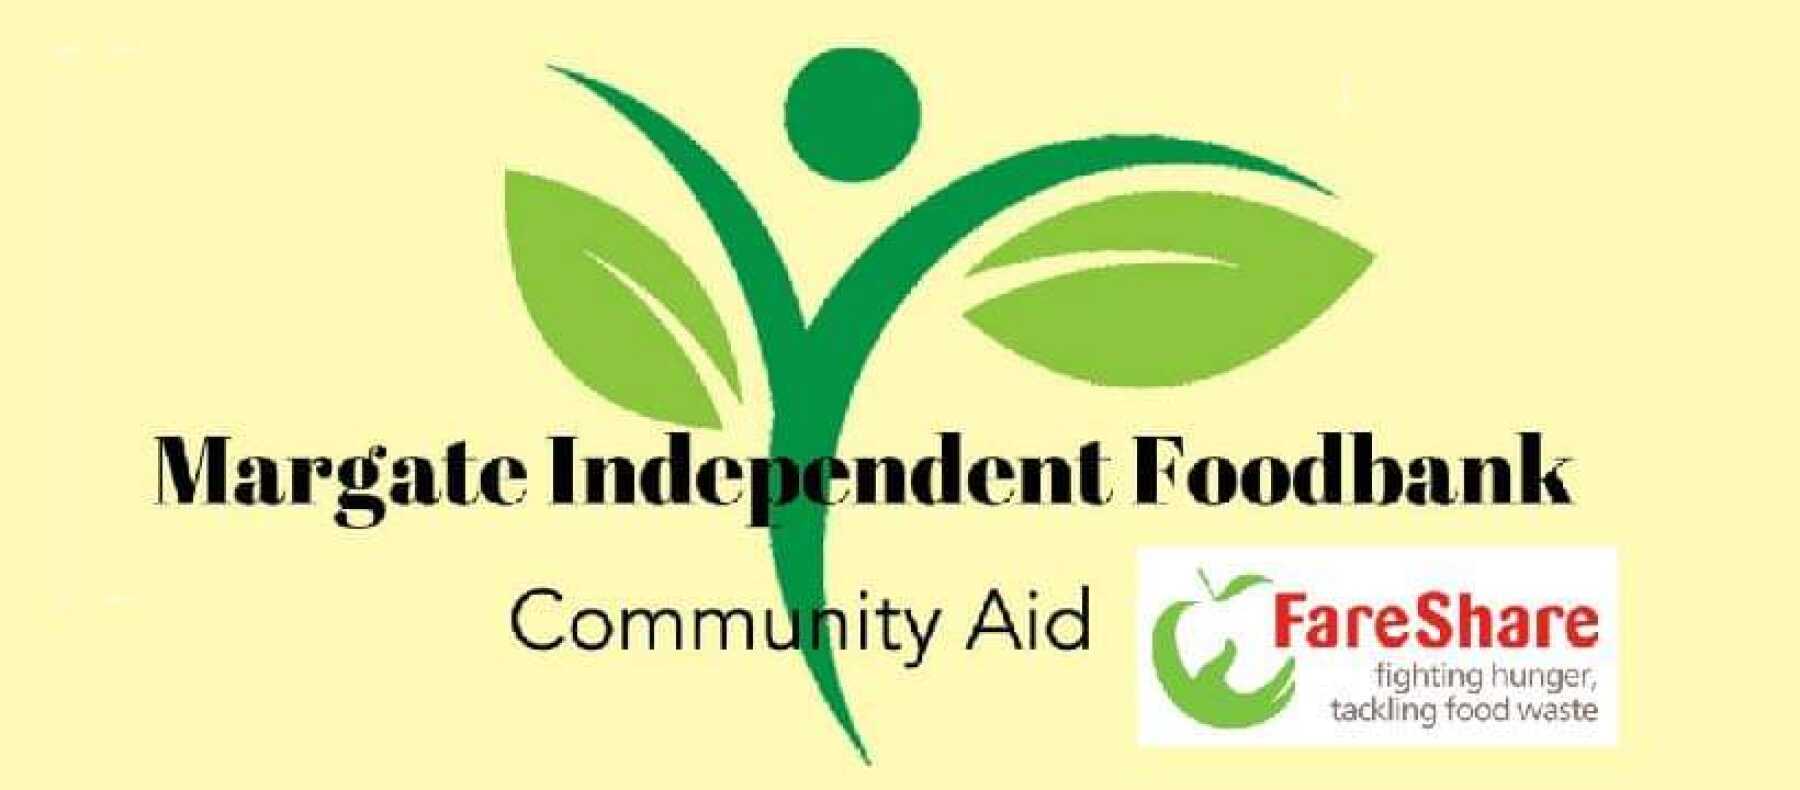 Featured Image for Margate Independent Foodbank